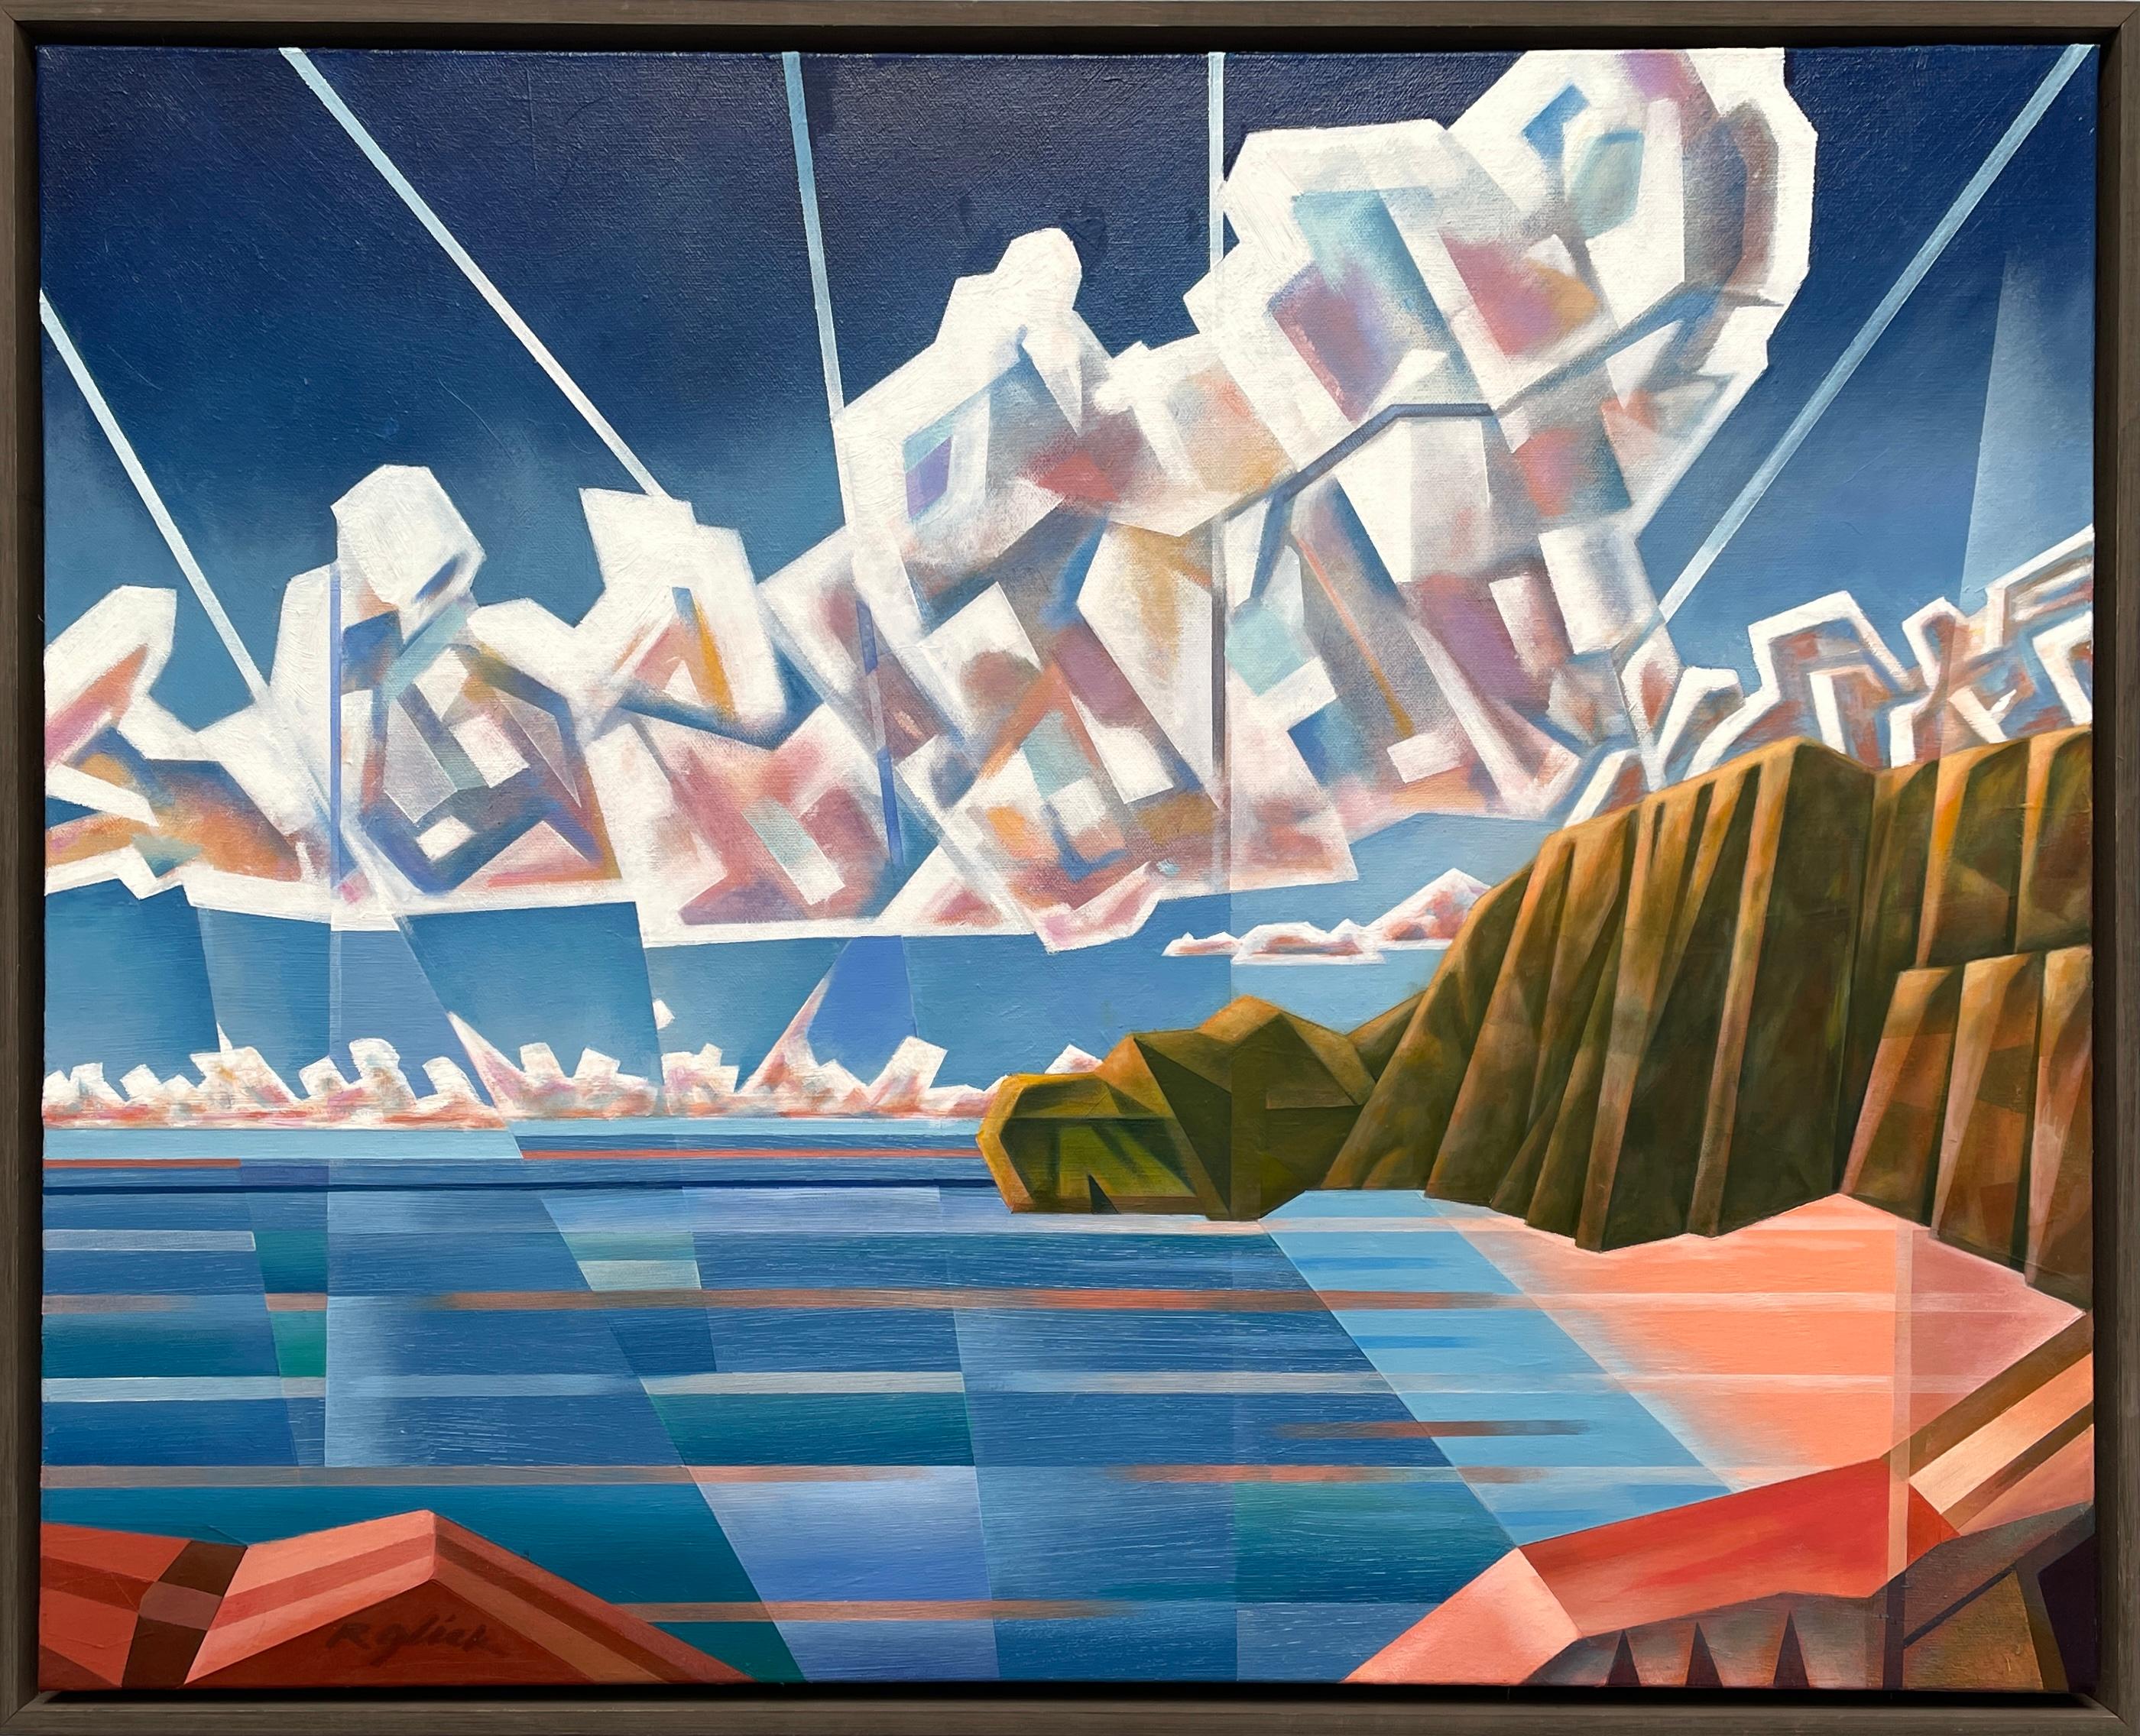 'Holiday Cove' by Robert Glick is a captivating 24" x 30" oil on canvas that exemplifies the principles of analytic cubism. This abstract seascape is composed of a series of fragmented, geometric forms that reconstruct the scene in a complex overlay